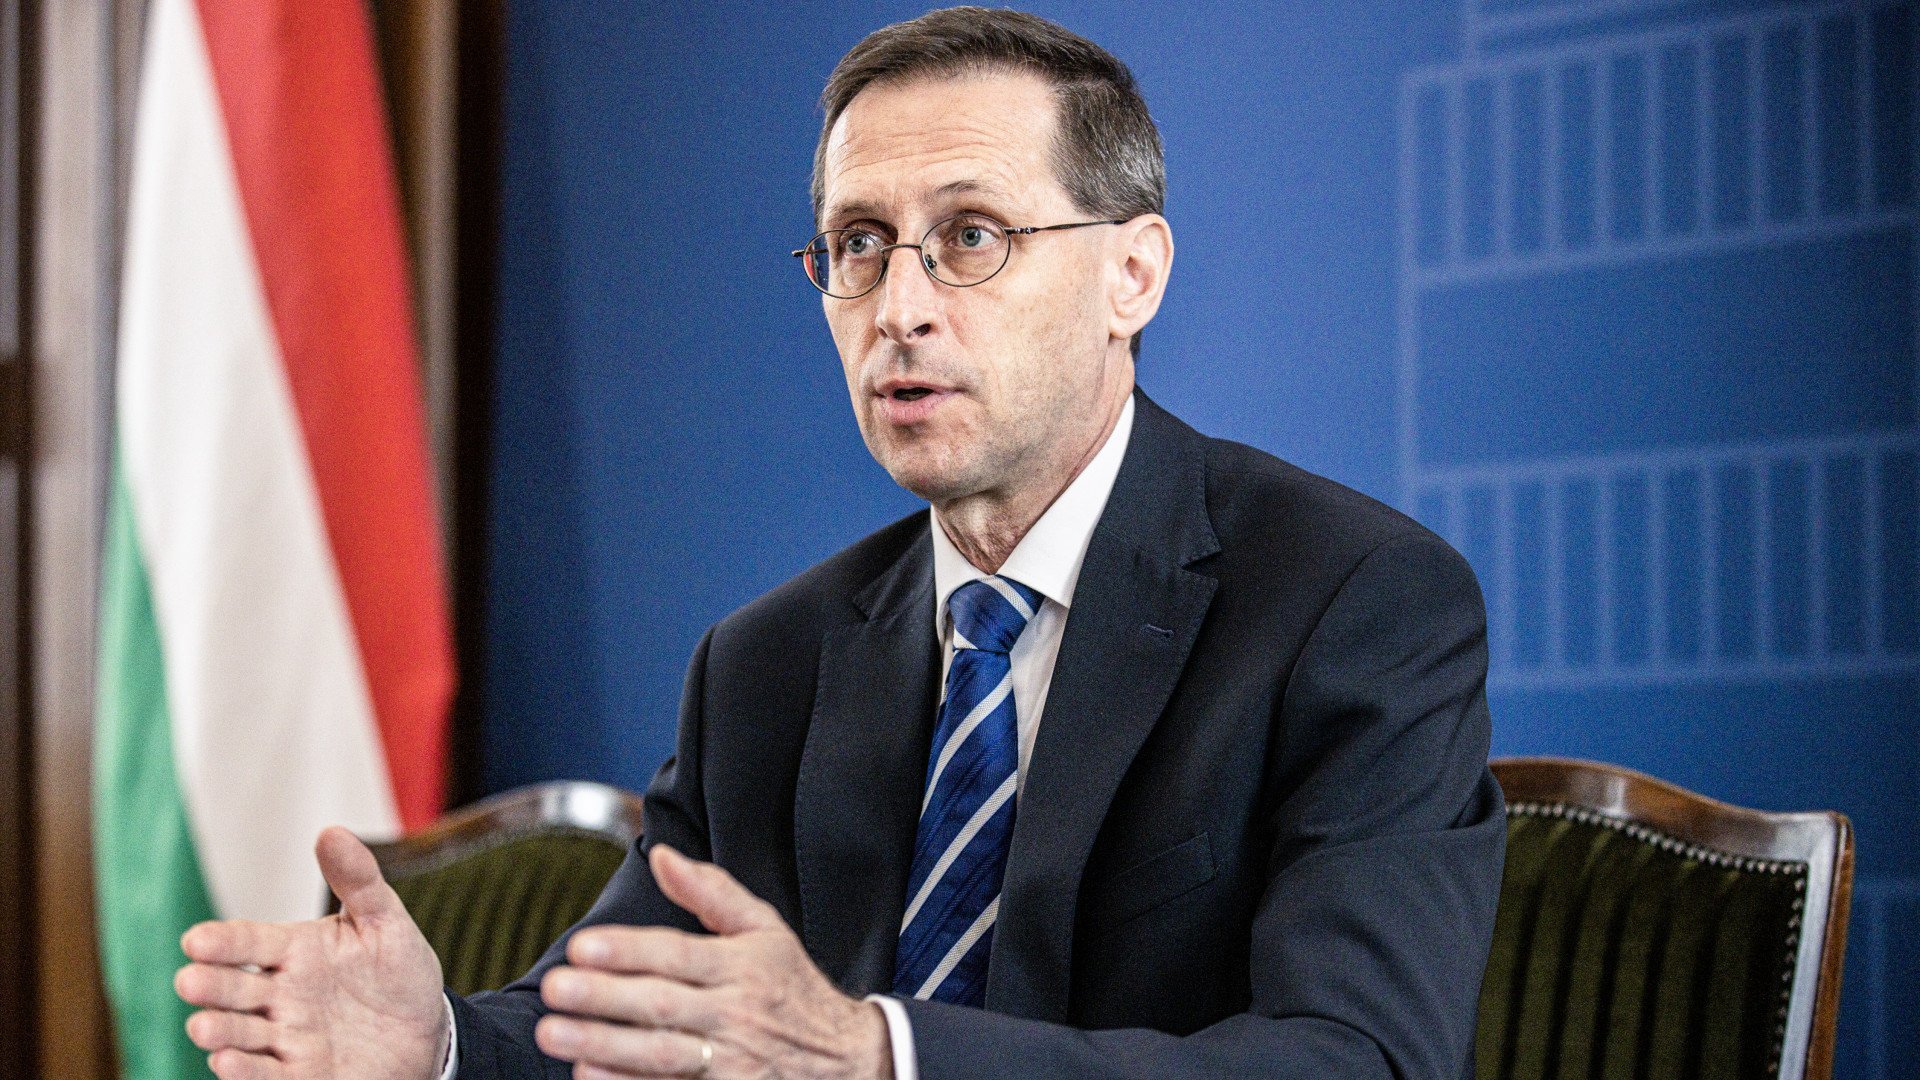 Hungarian Finance Minister Mihály Varga Reveals Key Details on the Upcoming 13th Month Pension